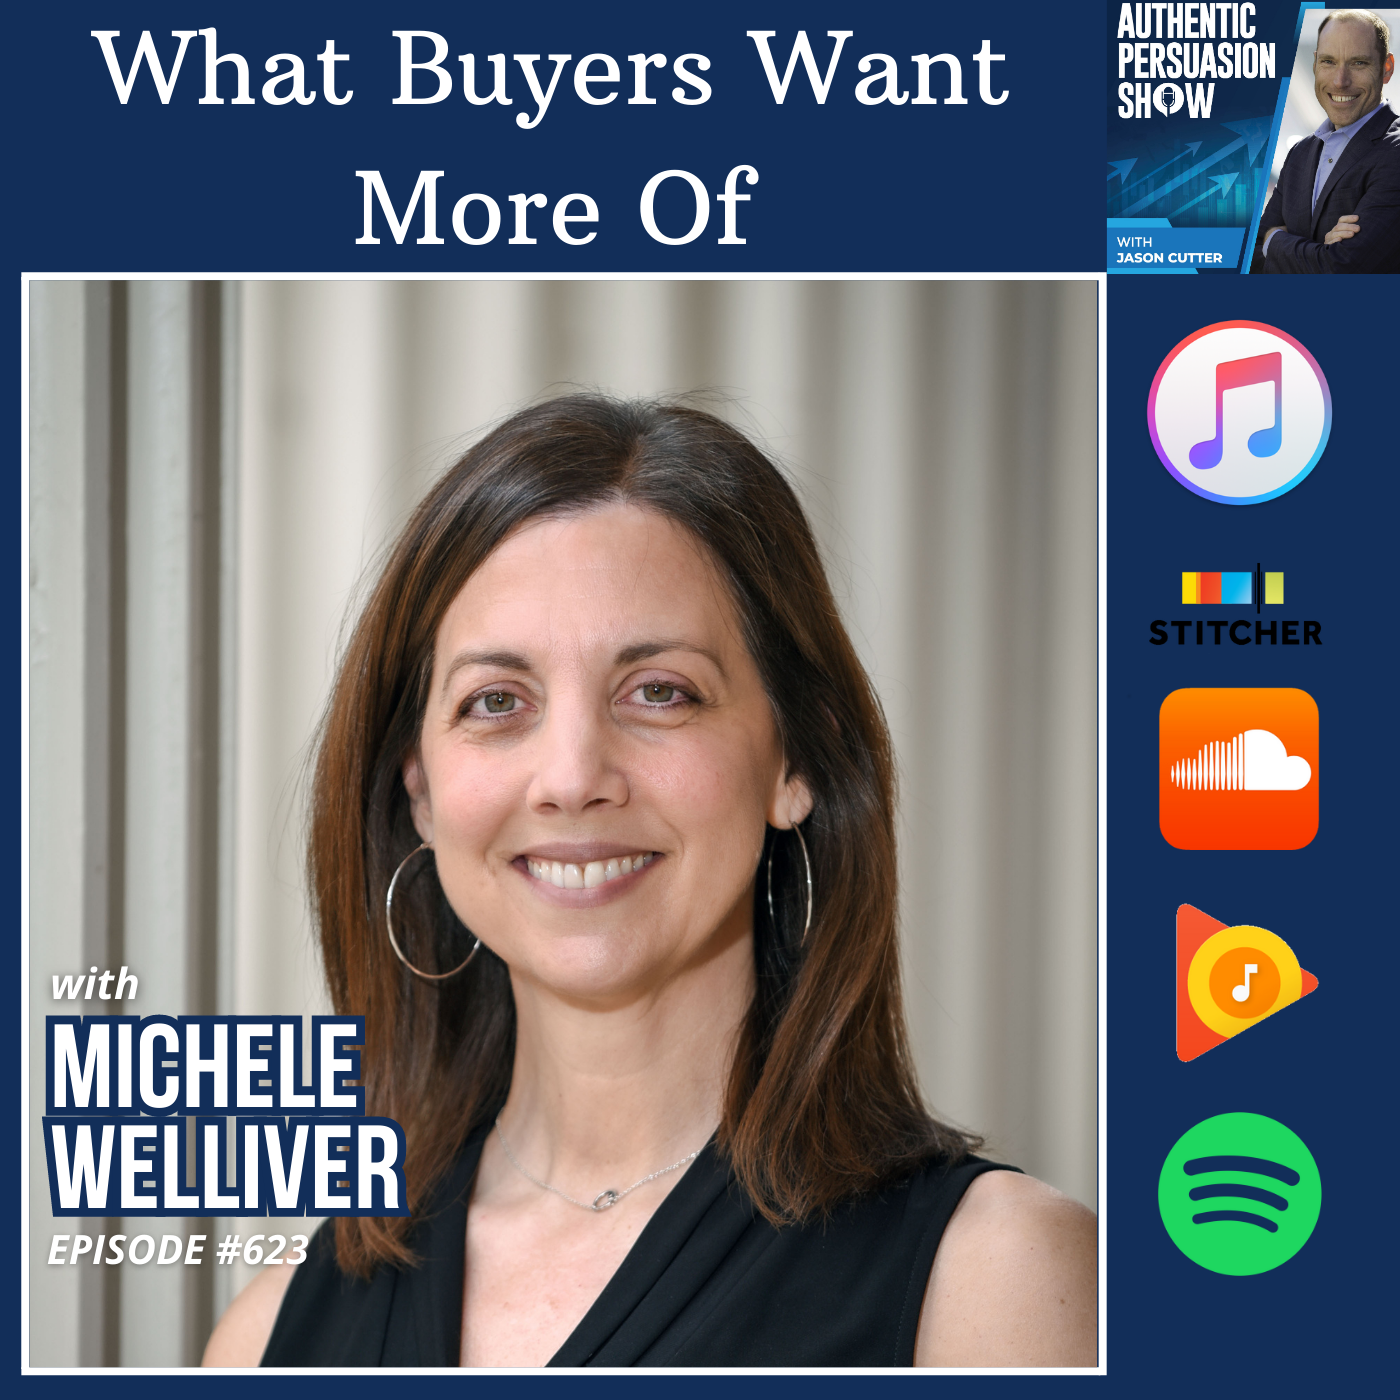 [623] What Buyers Want More Of, with Dr Michele Welliver from Susquehanna University